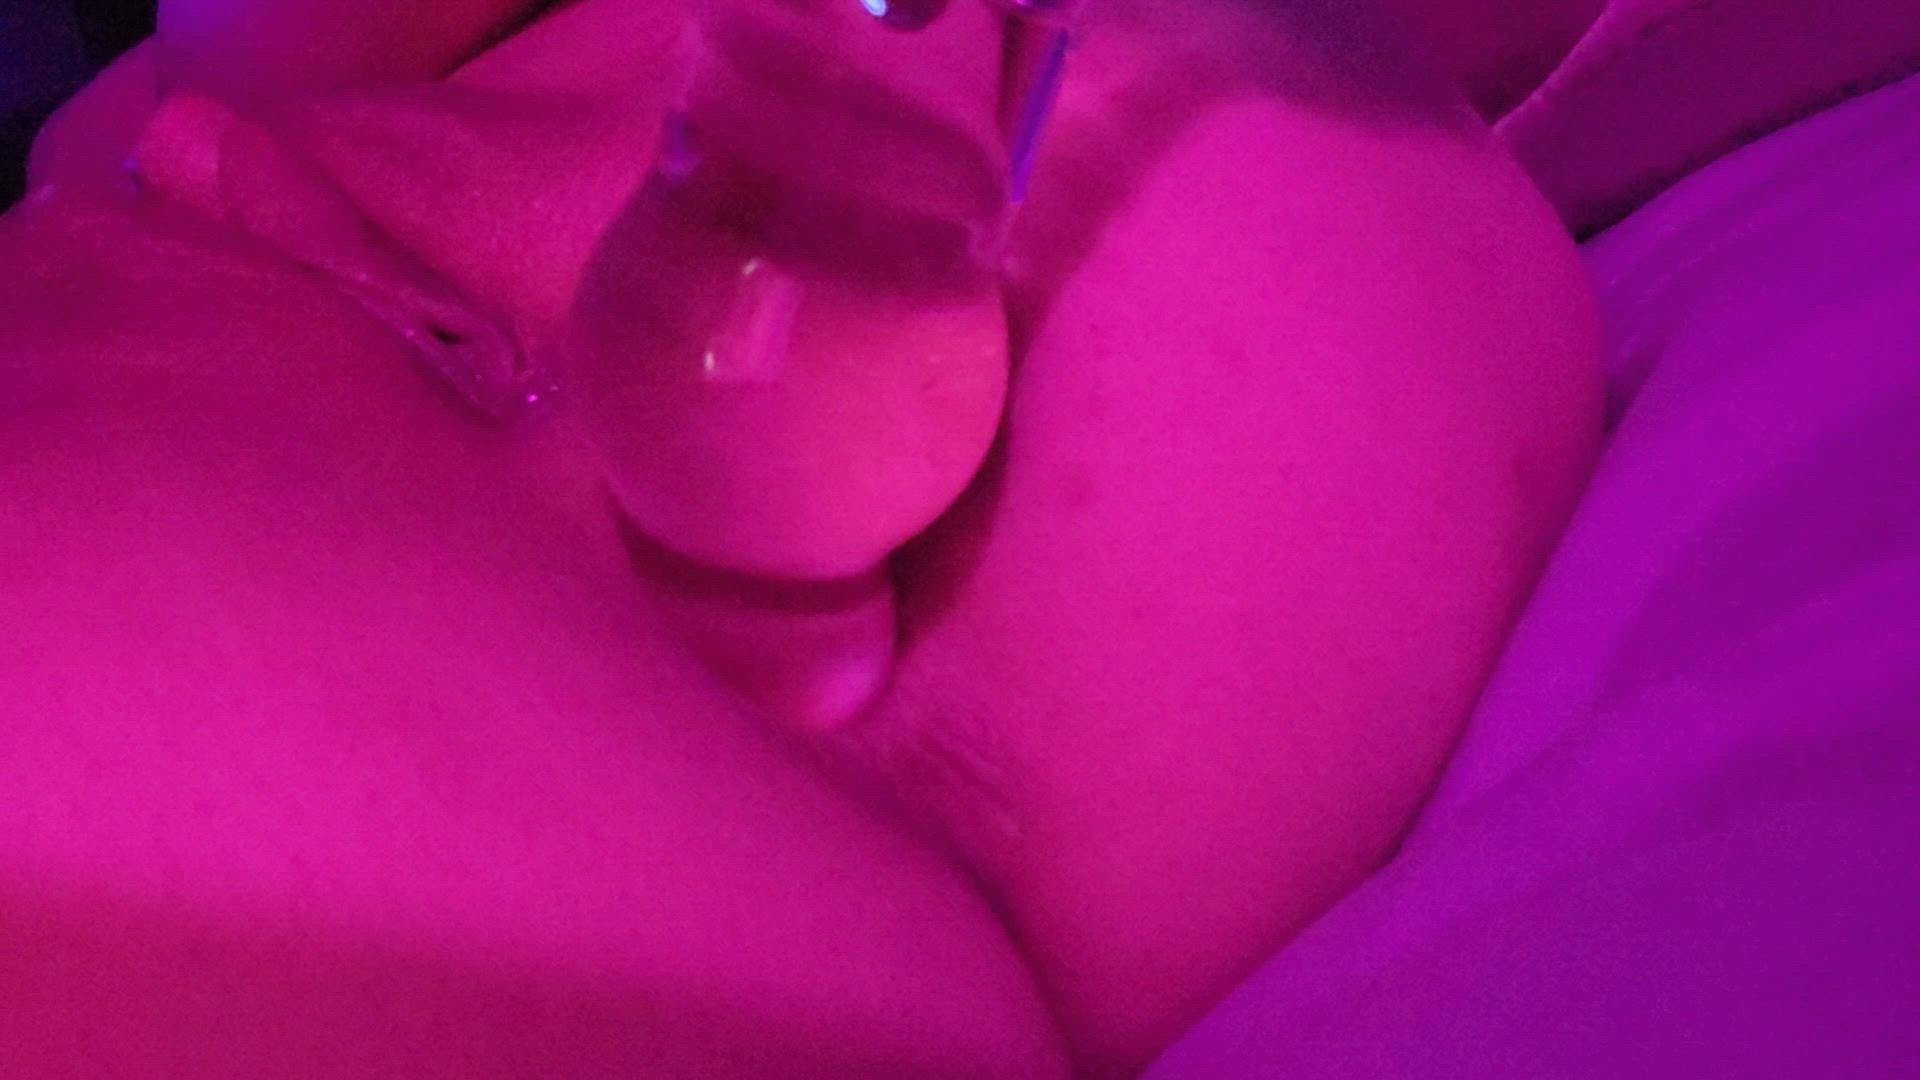 Anal porn video with onlyfans model Ms_Quean <strong>@msquean</strong>